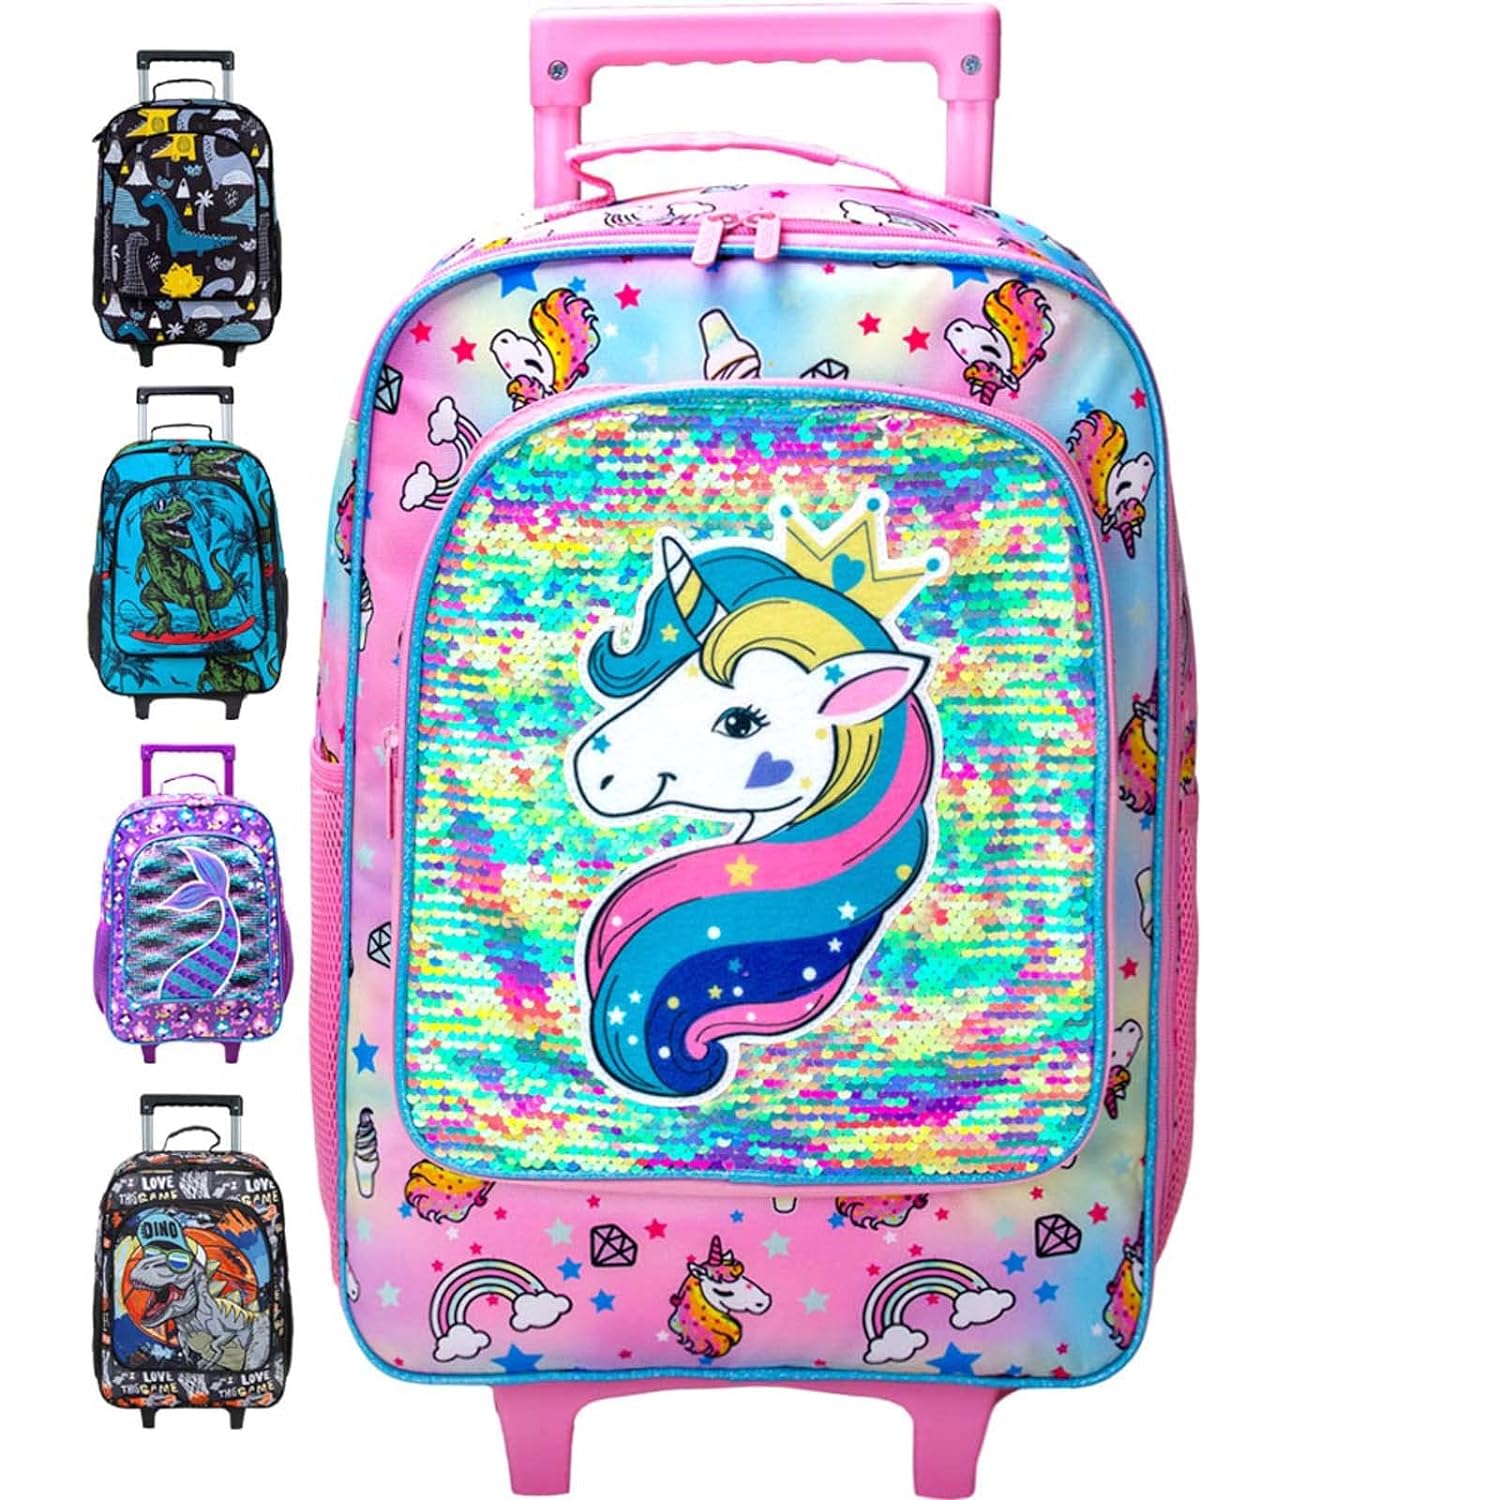 gxtvo Kids Suitcase with Wheels for Girls, Mermaid Rolling carry on Luggage for Toddler Children